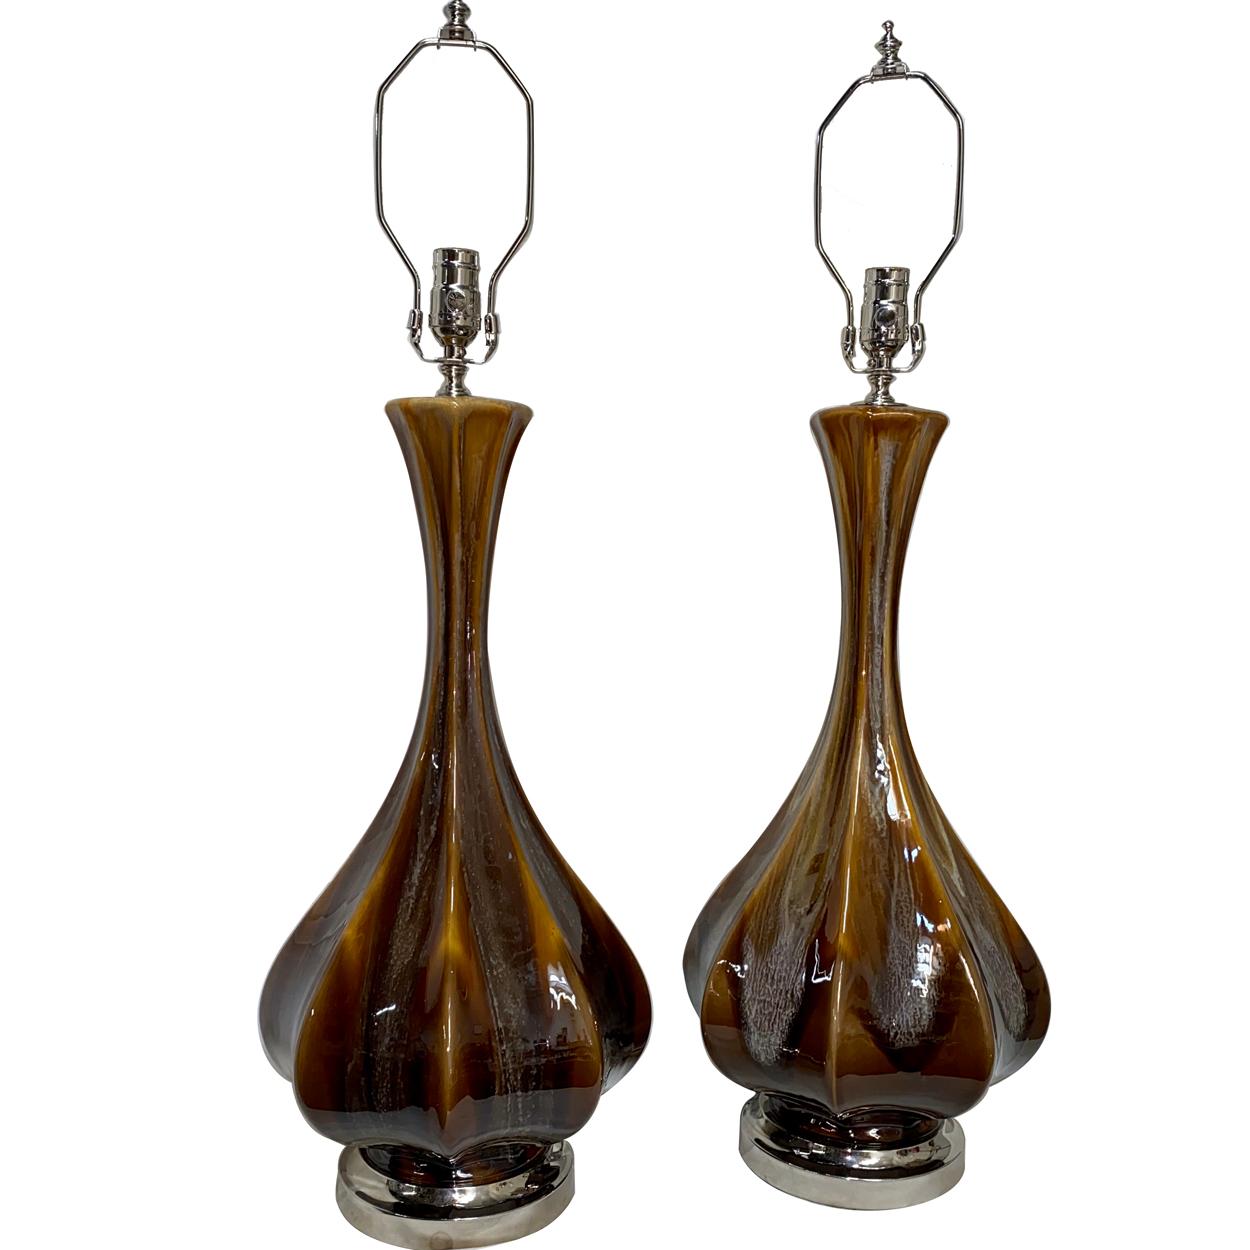 Pair of circa 1960s Italian porcelain table lamps with silver-plated bases.

Measurements:
Height of body: 23